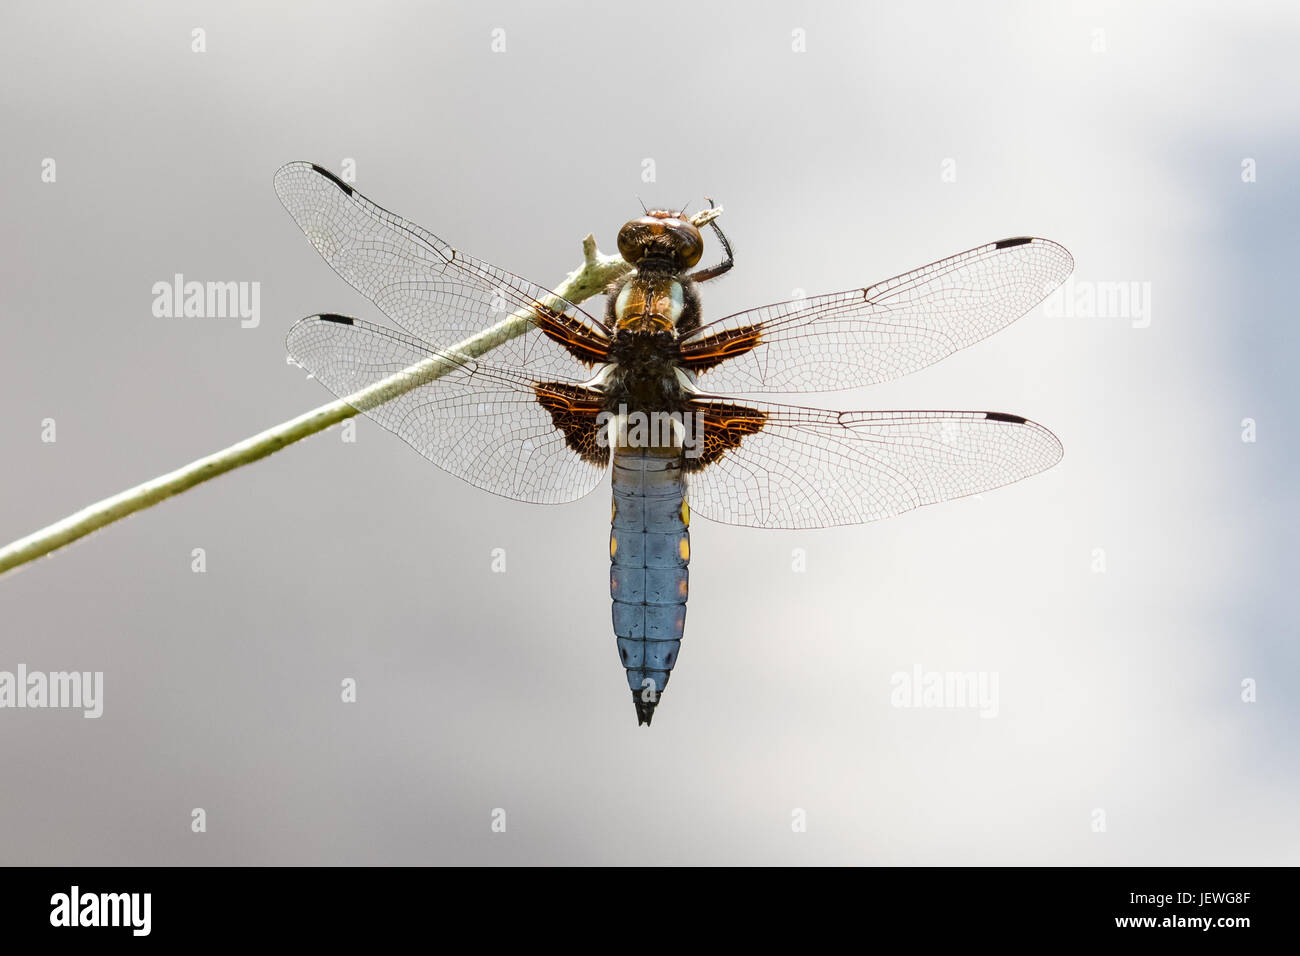 Top or dorsal view of a single male Broad-bodied Chaser dragonfly (Libellula depressa) hanging from or clinging to a stem against cloudy reflection Stock Photo